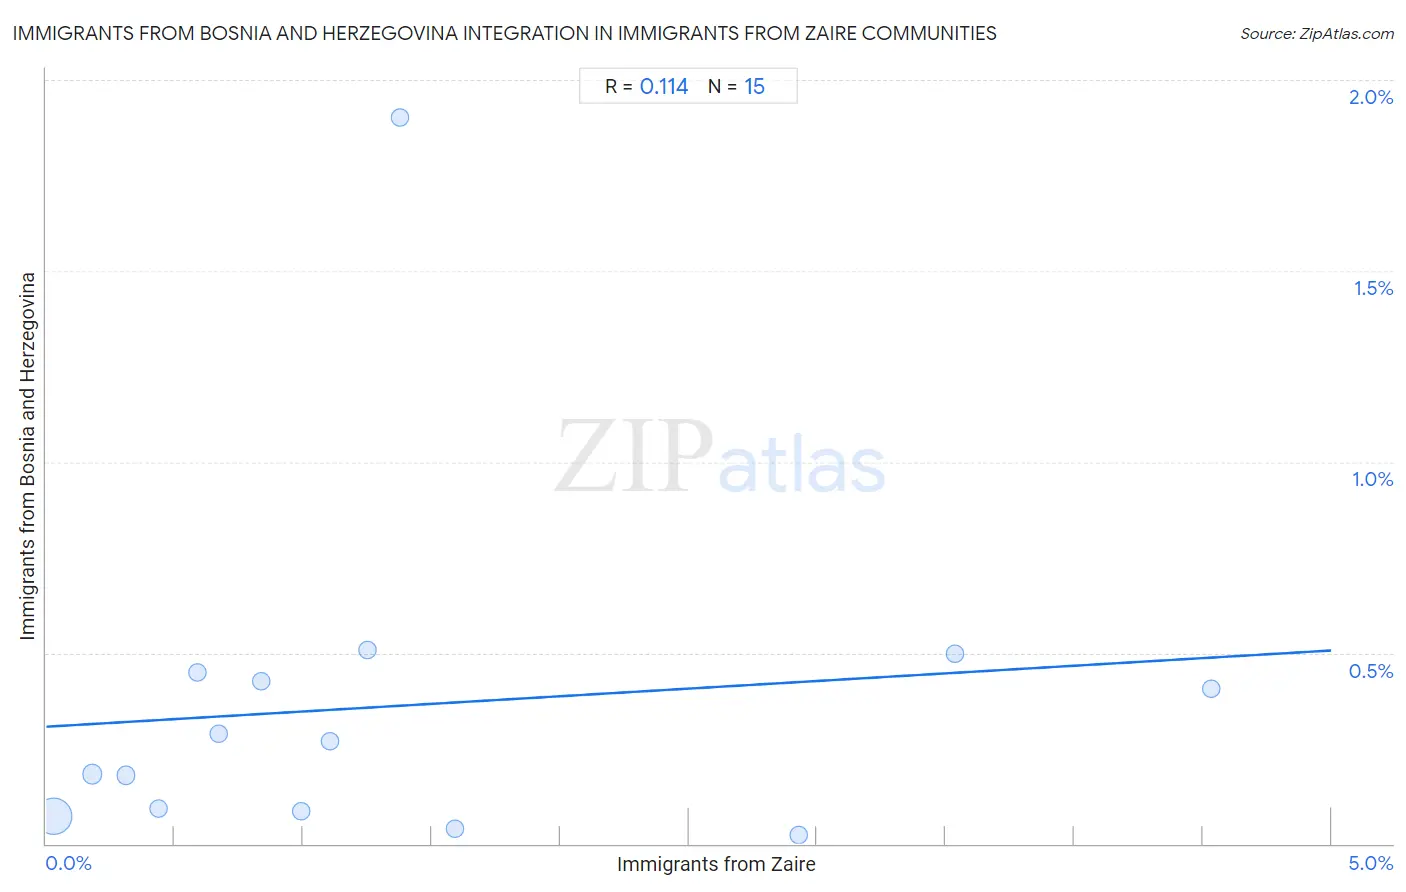 Immigrants from Zaire Integration in Immigrants from Bosnia and Herzegovina Communities